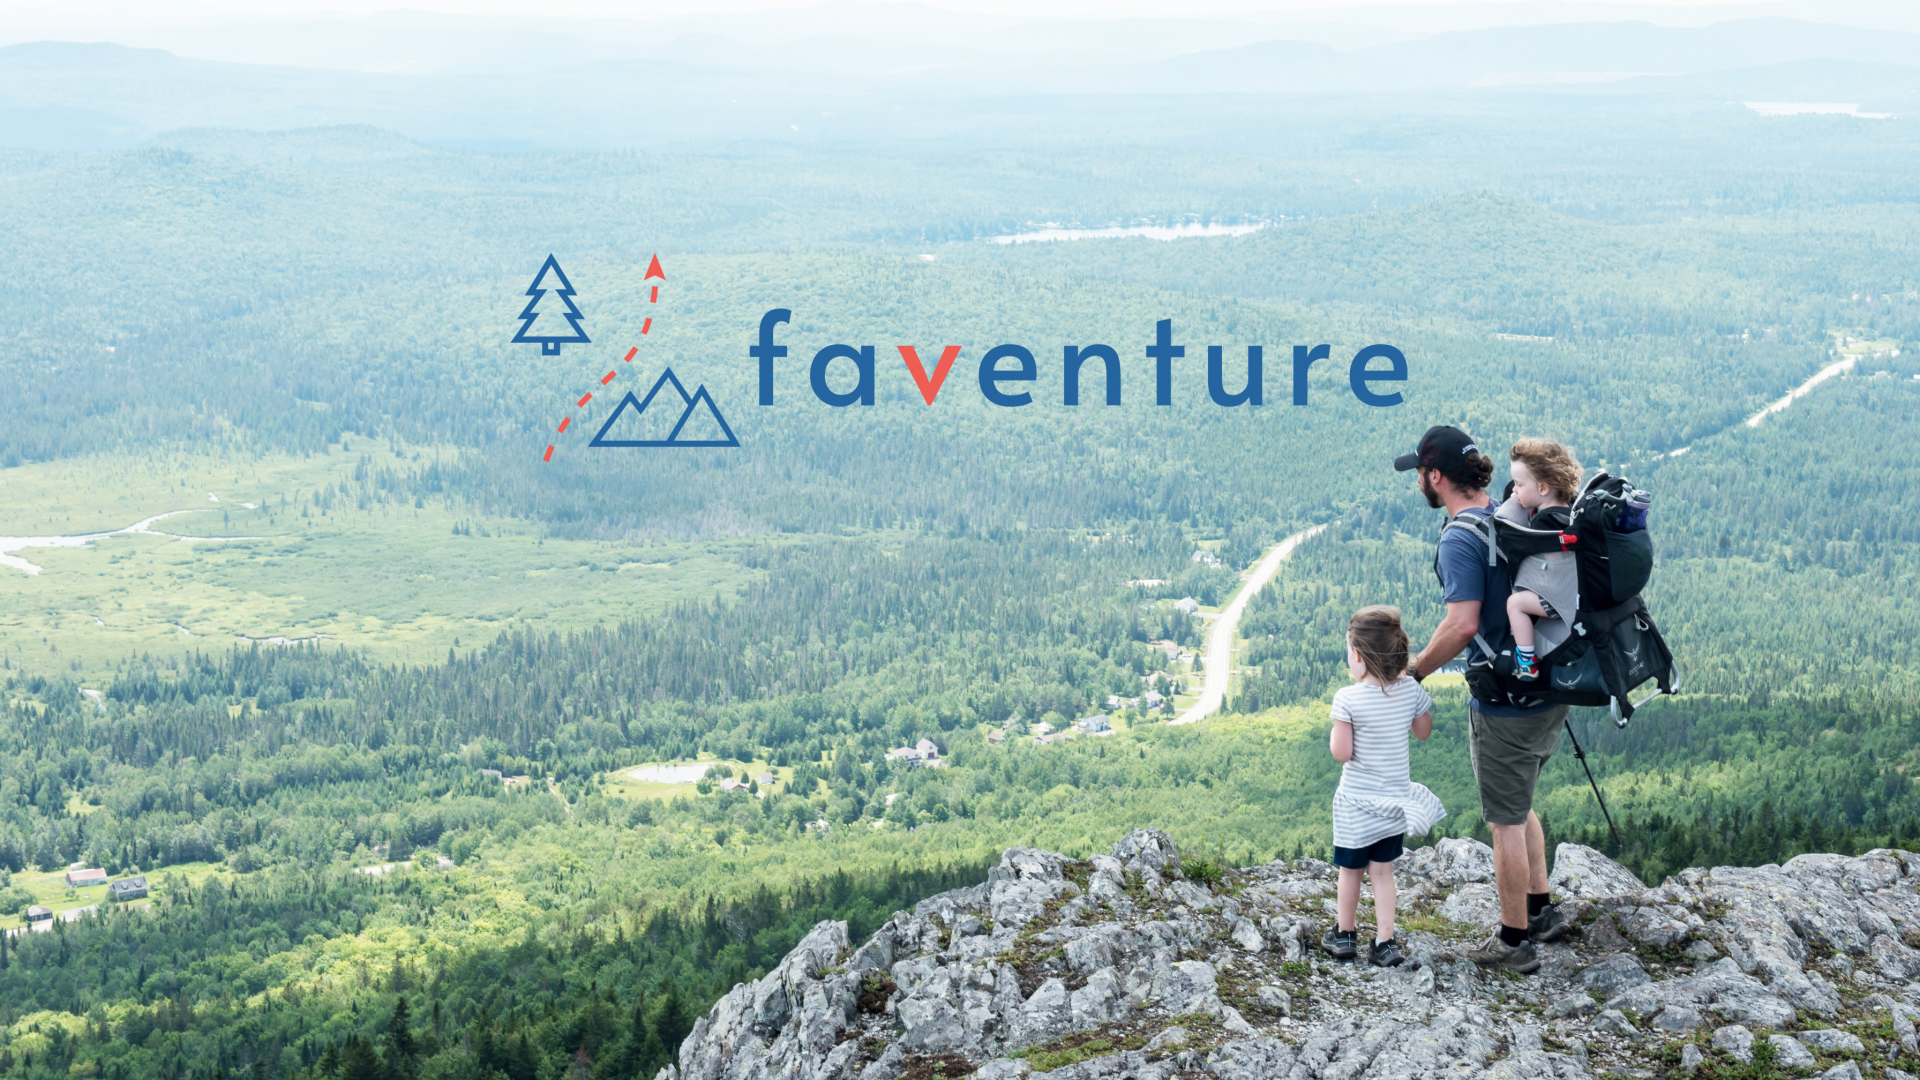 The place for families who's looking for adventures